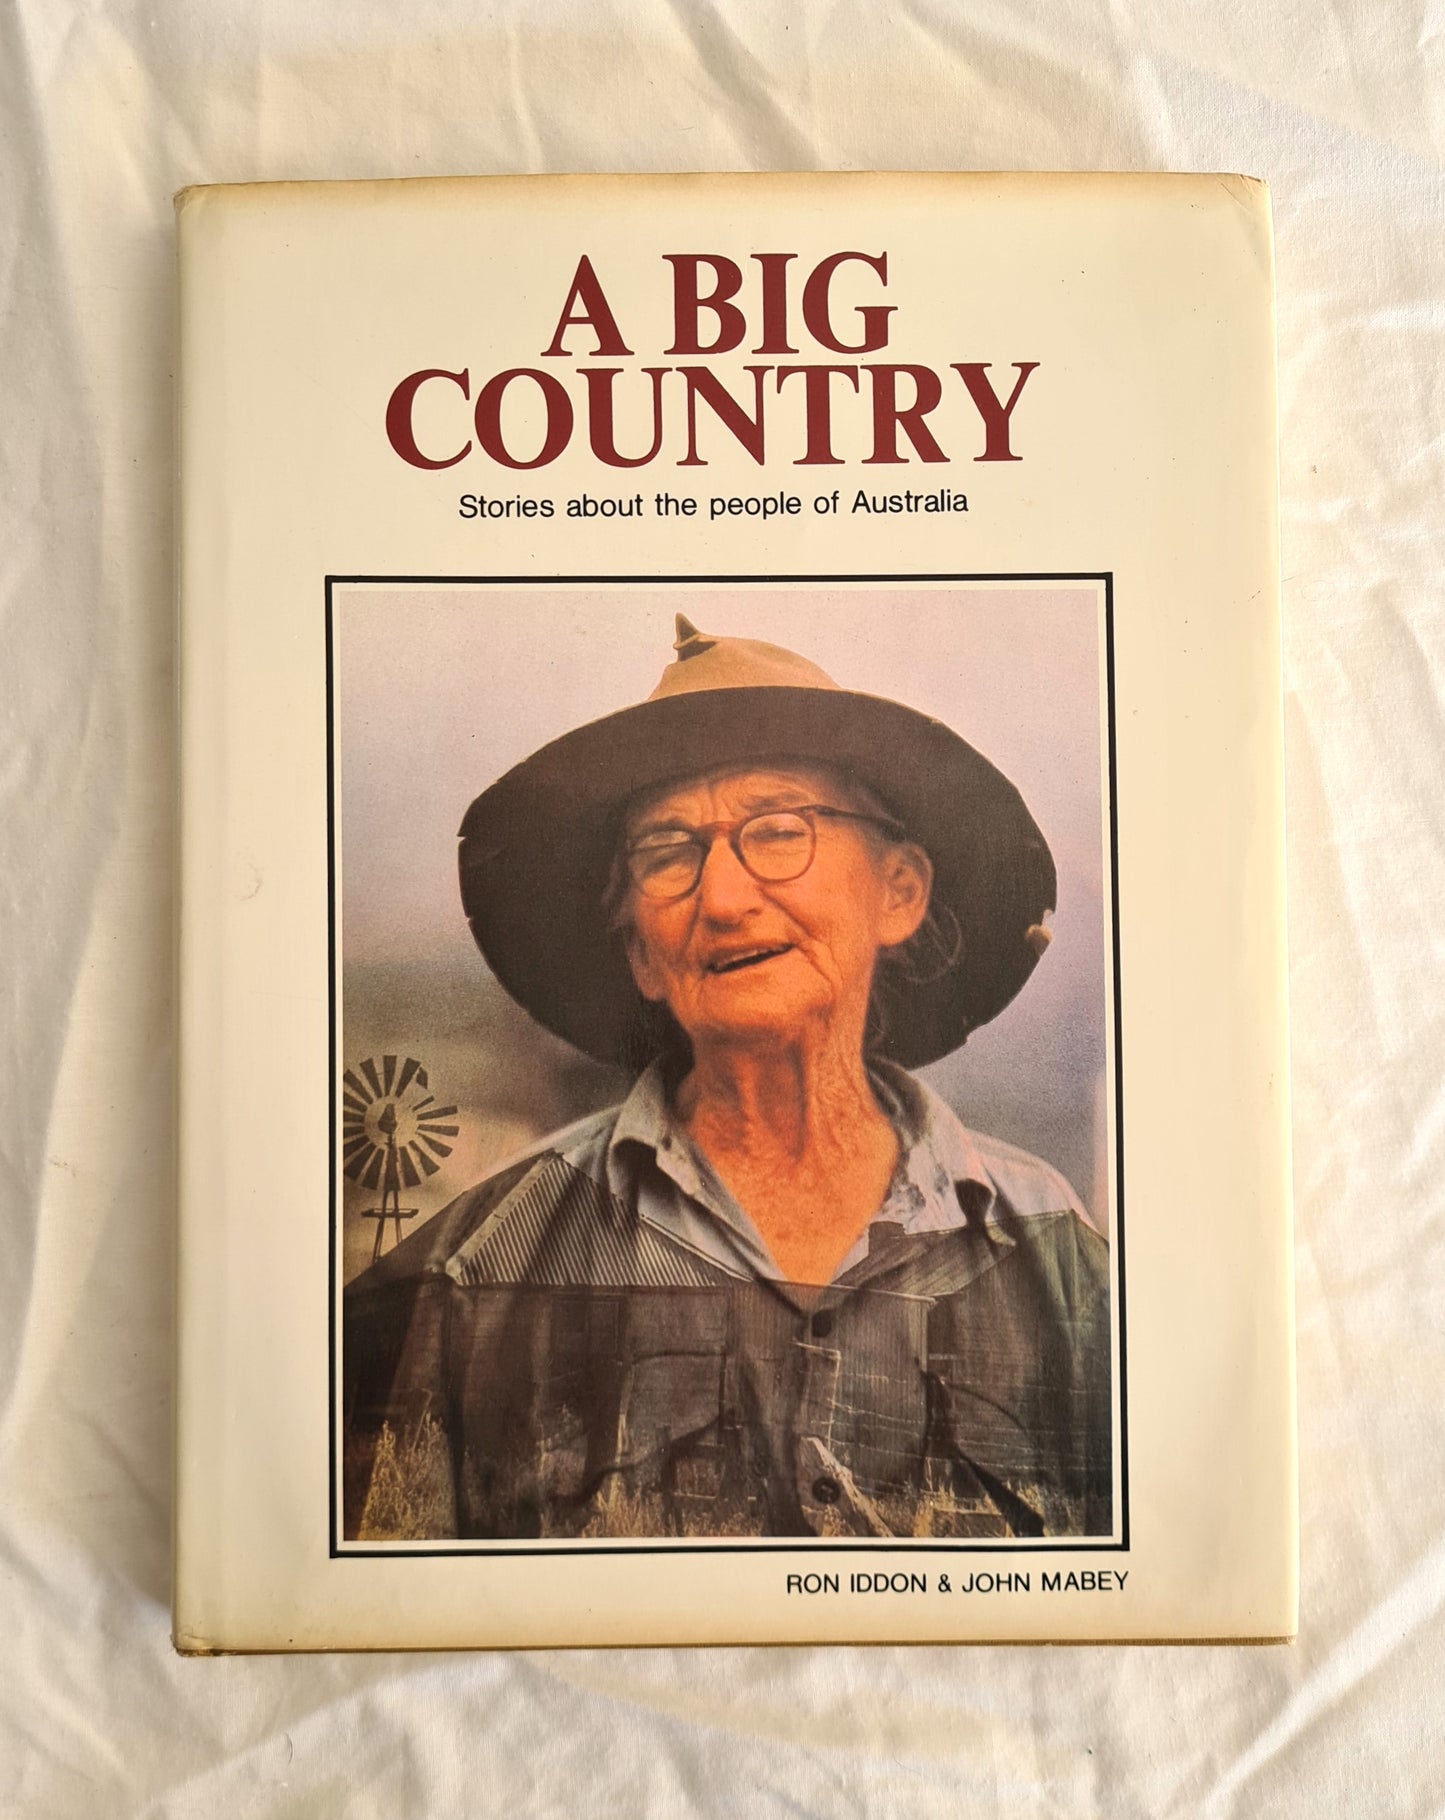 A Big Country  Stories about the people of Australia  by Ron Iddon and John Mabey